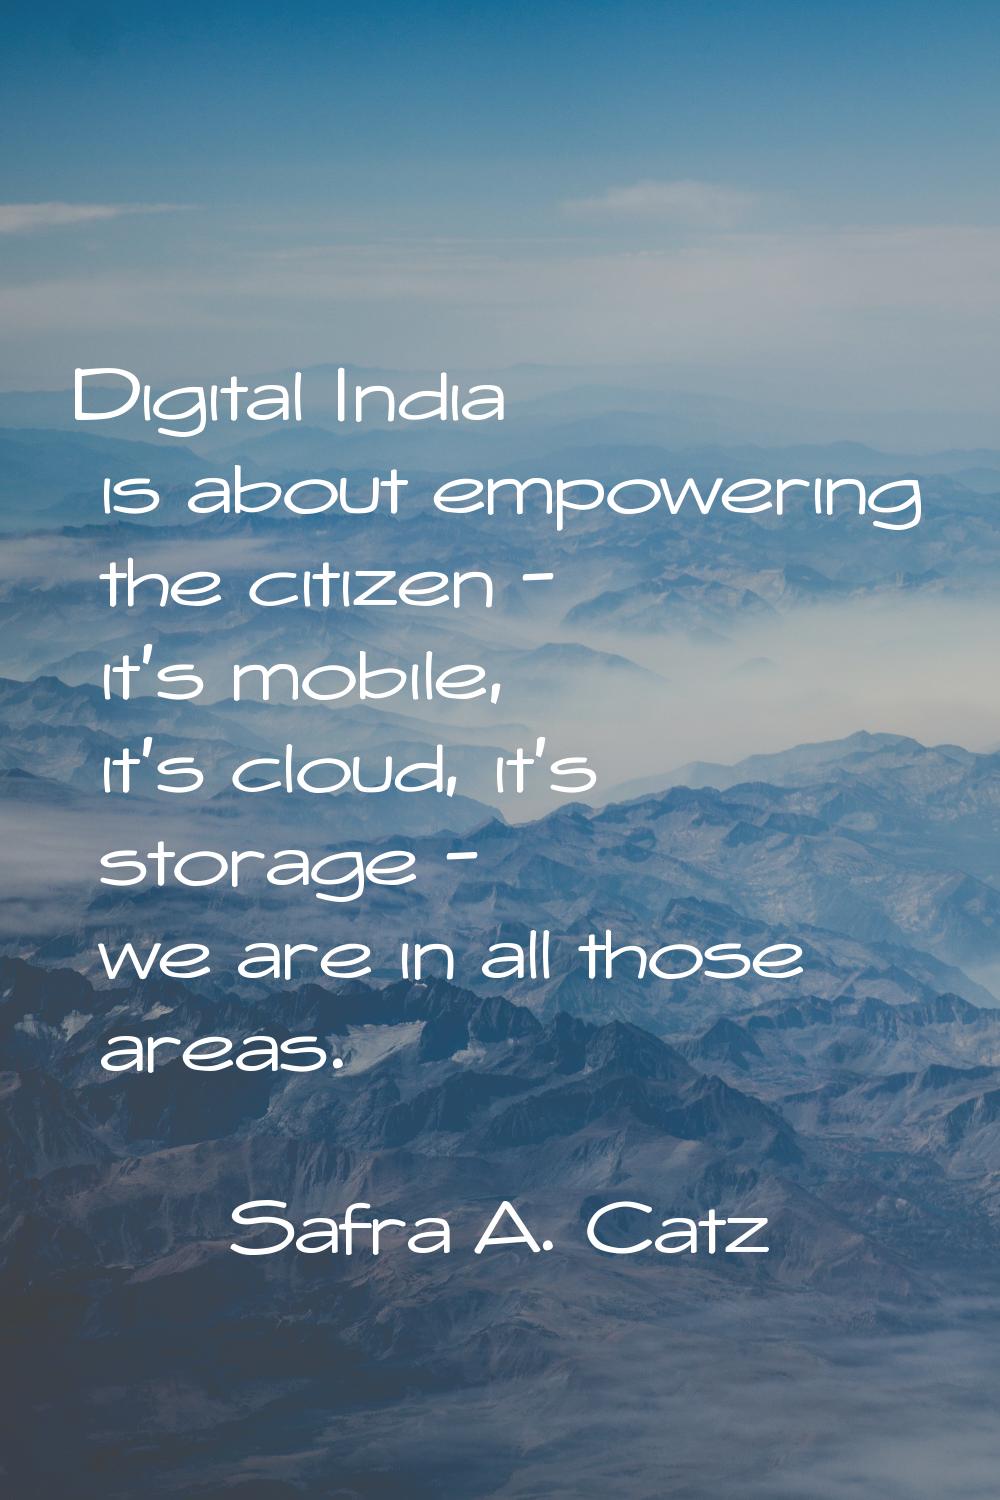 Digital India is about empowering the citizen - it's mobile, it's cloud, it's storage - we are in a